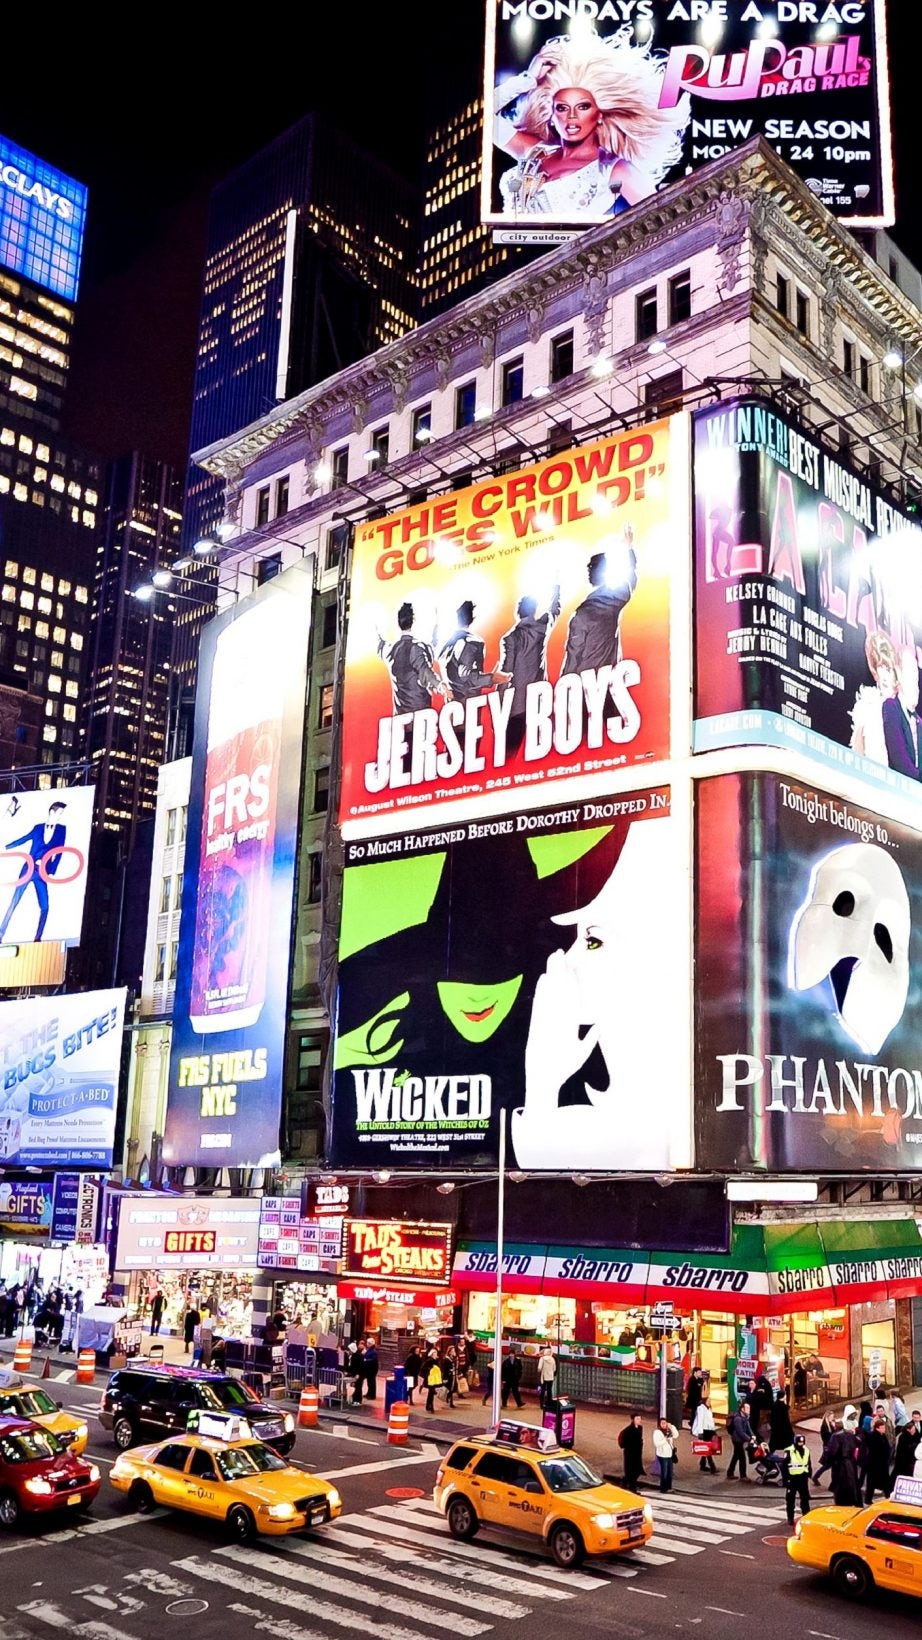 What’s new on Broadway?